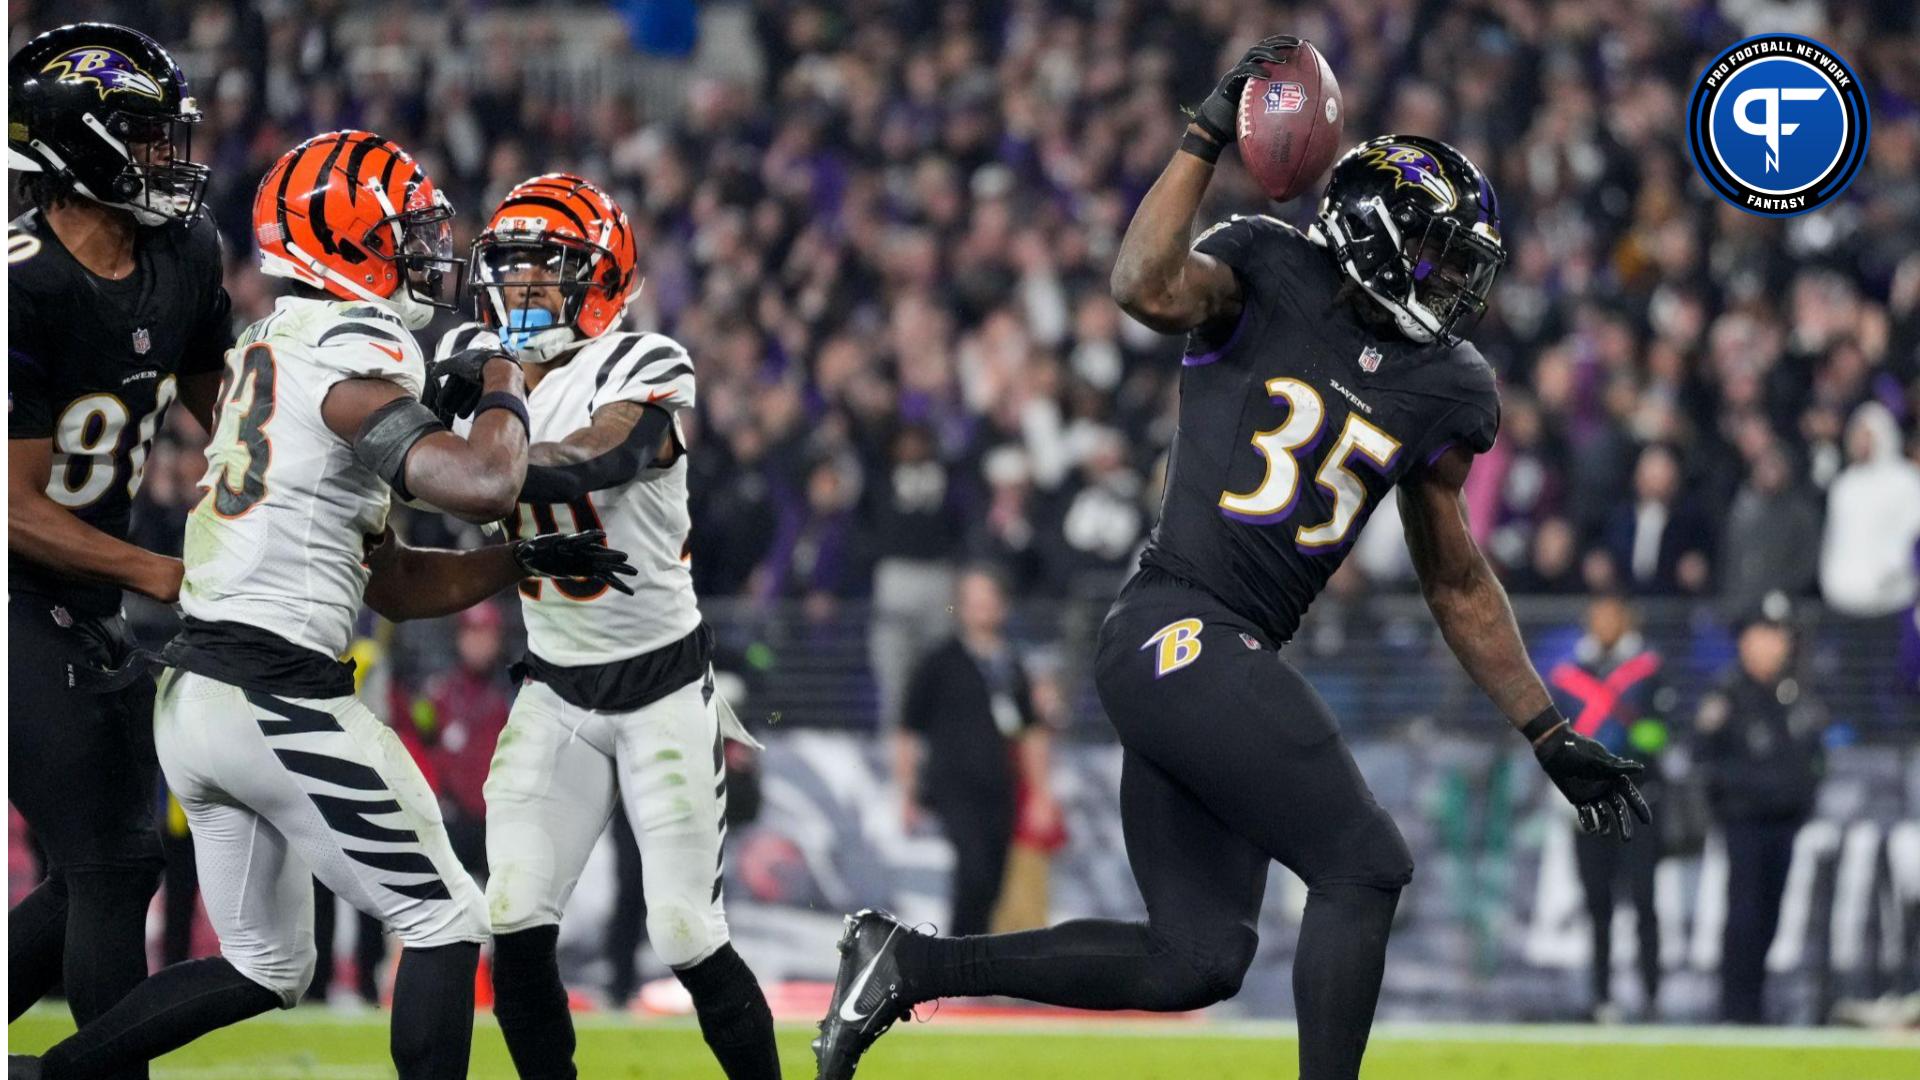 Baltimore Ravens running back Gus Edwards (35) breaks into the end zone for a touchdown in the fourth quarter against the Cincinnati Bengals at M&T Bank Stadium.